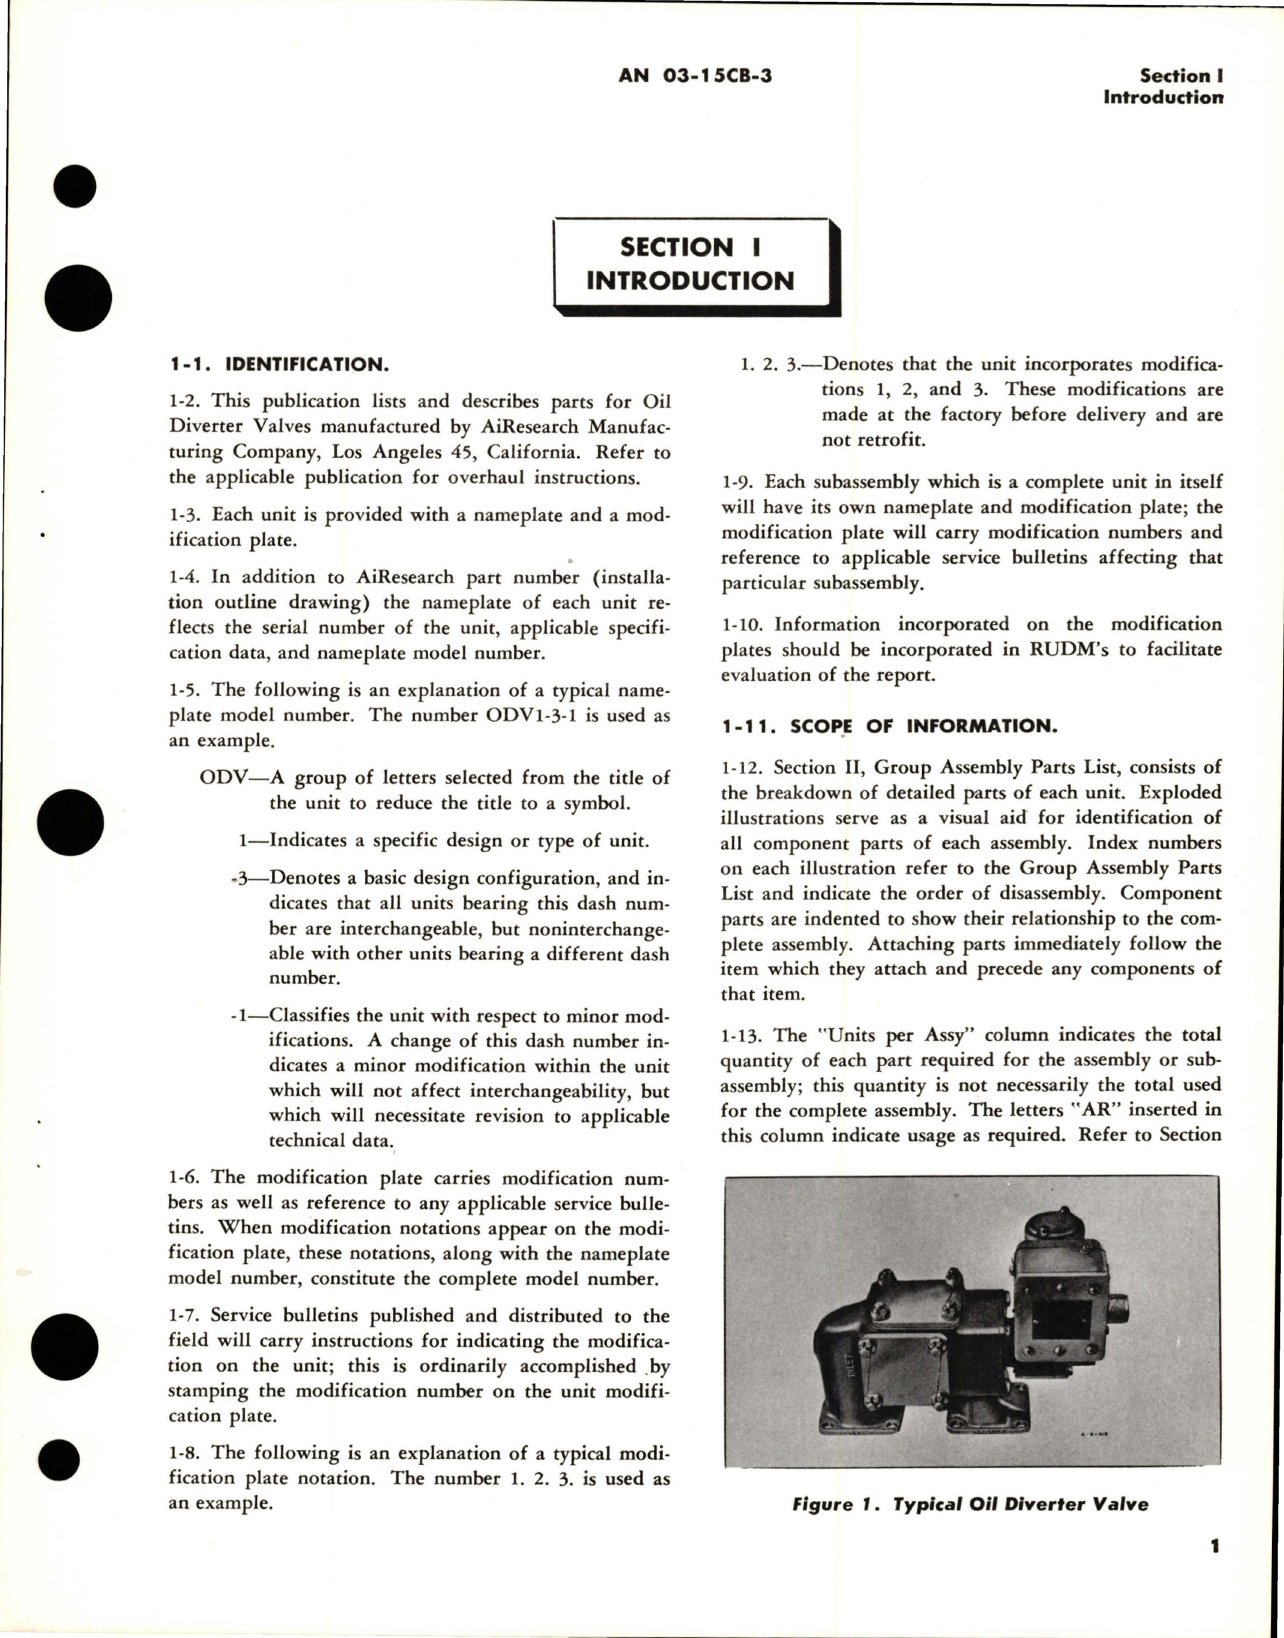 Sample page 5 from AirCorps Library document: Illustrated Parts Breakdown for Oil Diverter Valves